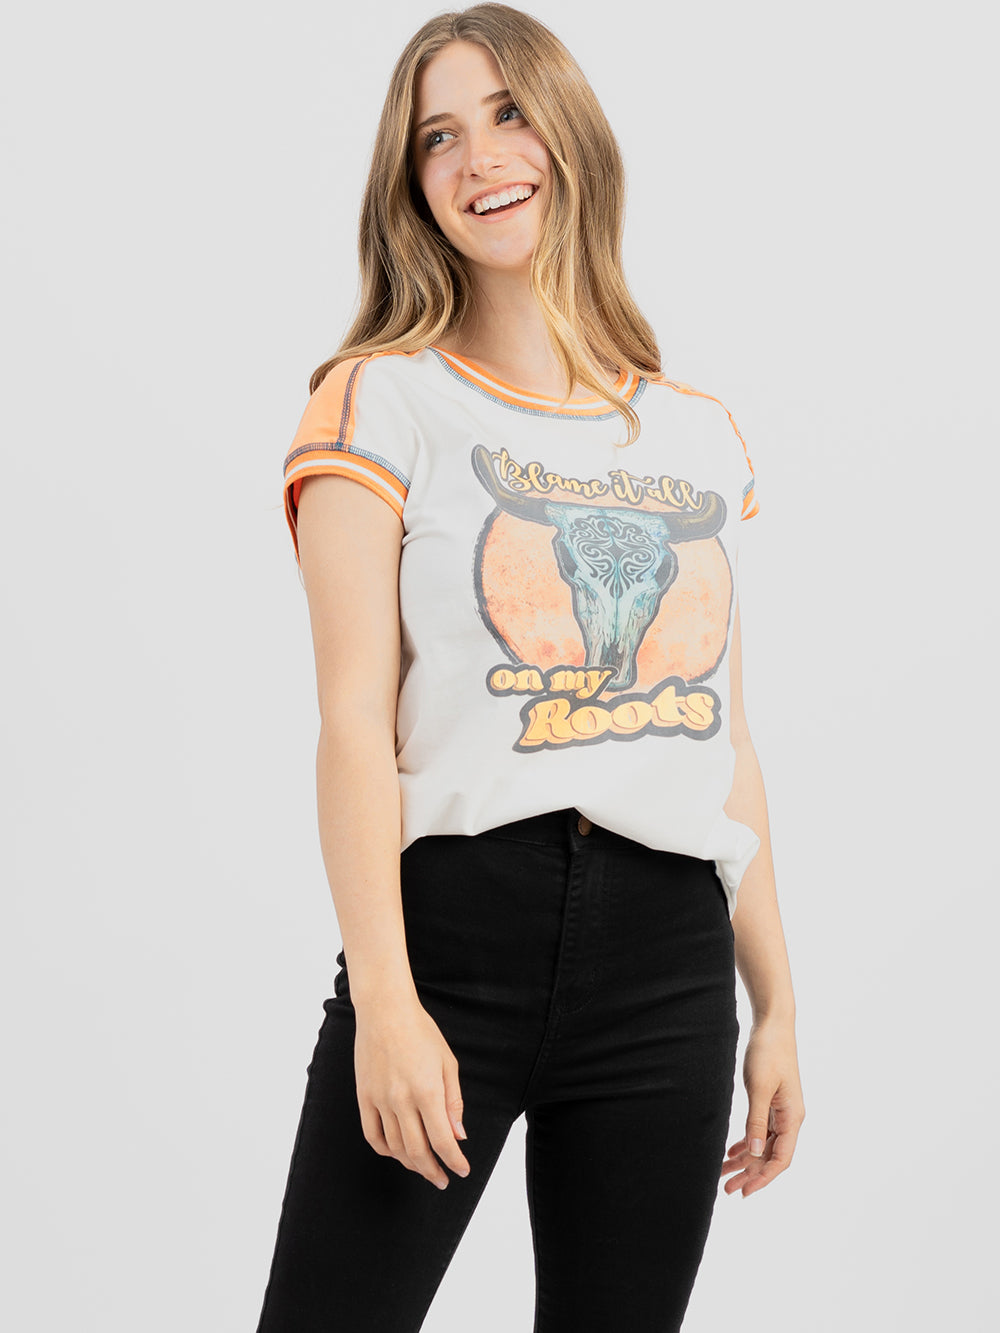 Women's Mineral Wash “Cow Skull” Graphic Short Sleeve Tee - Cowgirl Wear